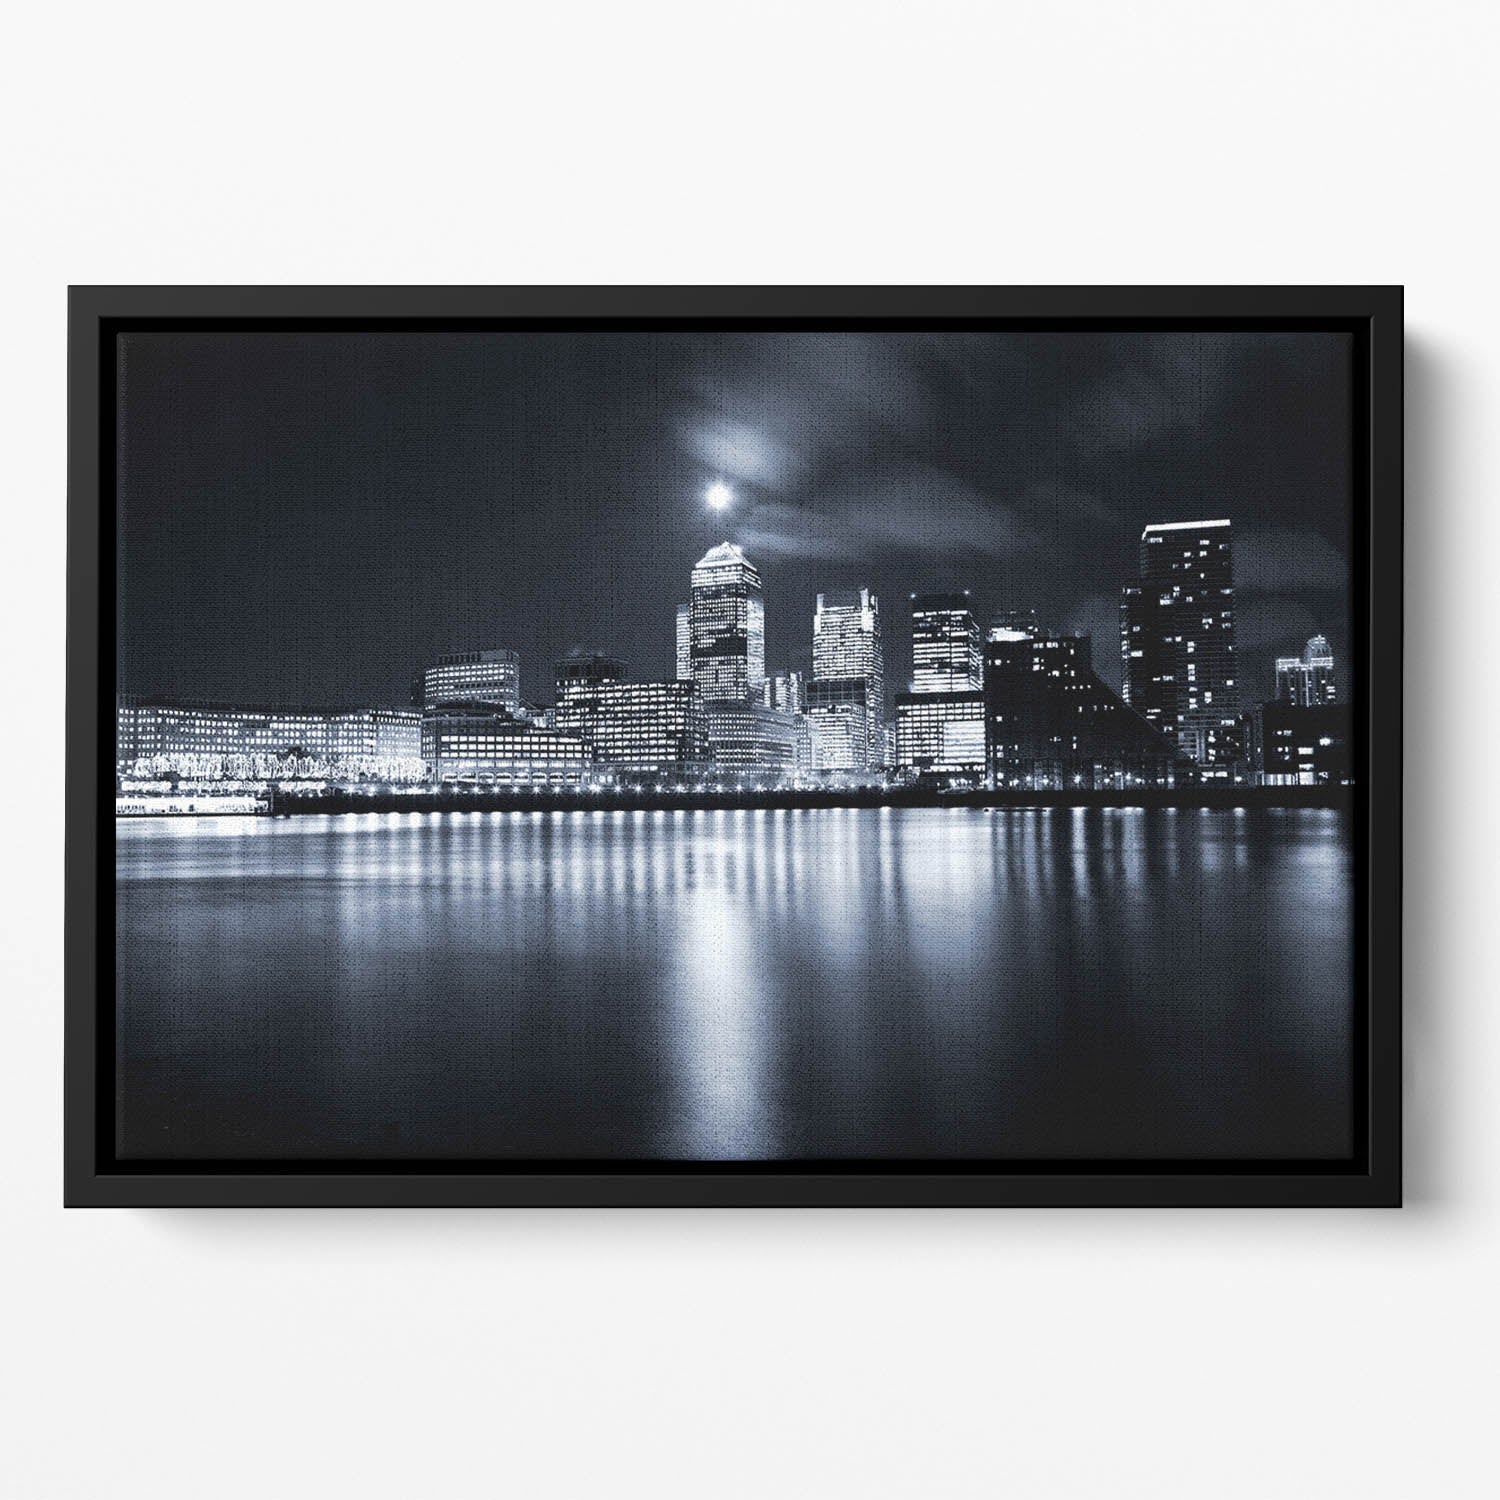 Full moon over London skyscrapers Floating Framed Canvas